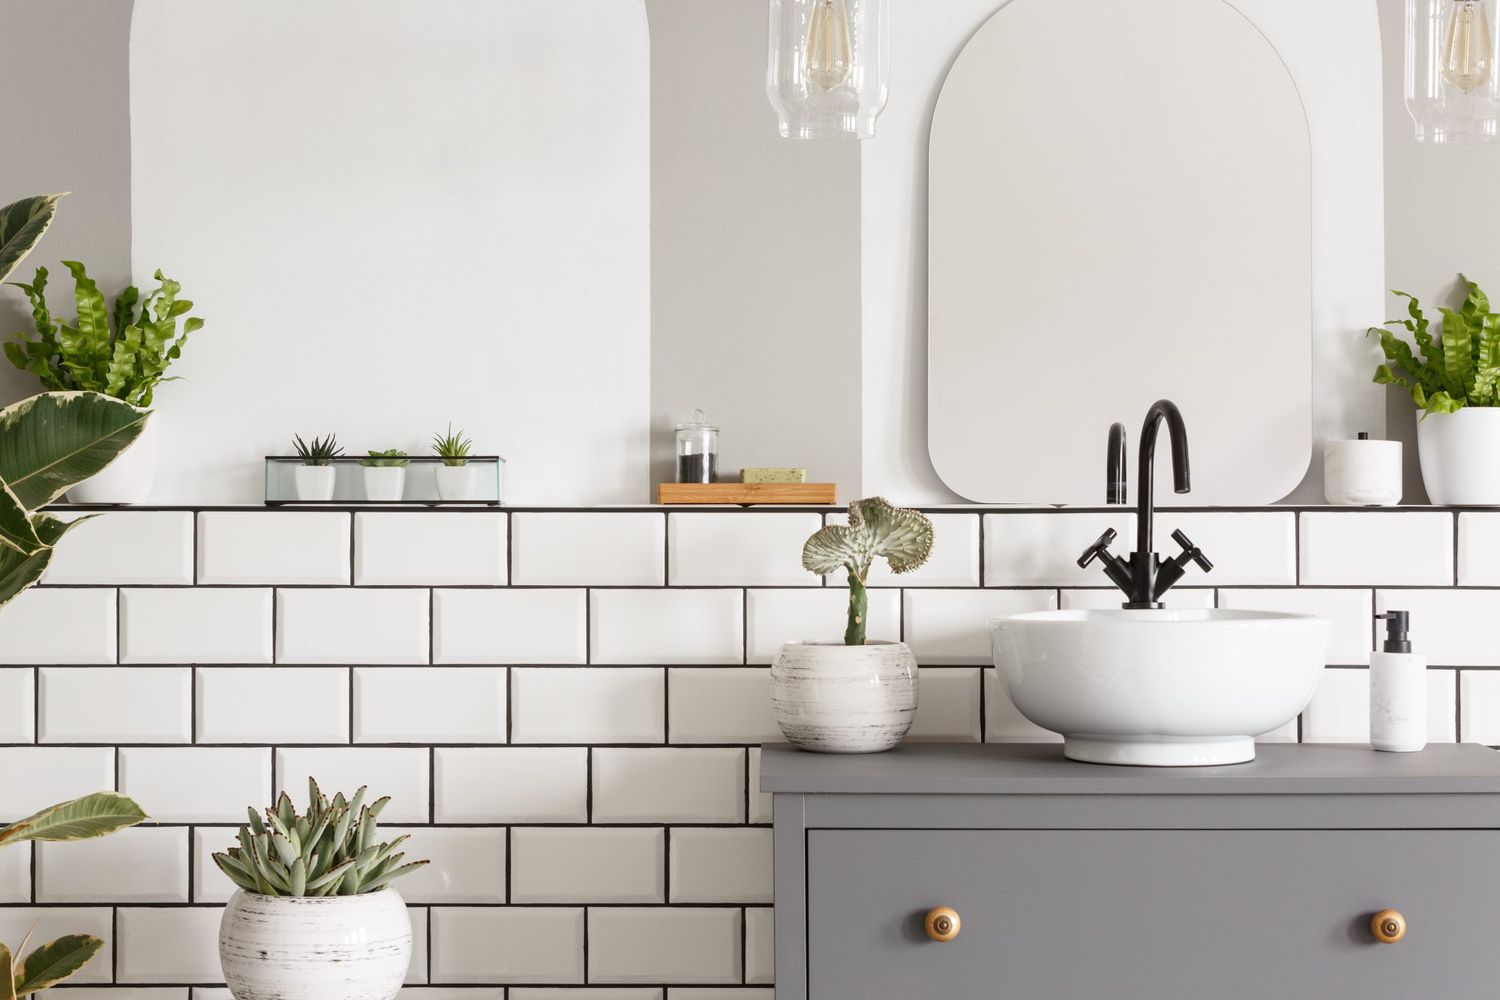 photo of a sink on a cupbaord in a bathroom interior with tiles, mirror and plants